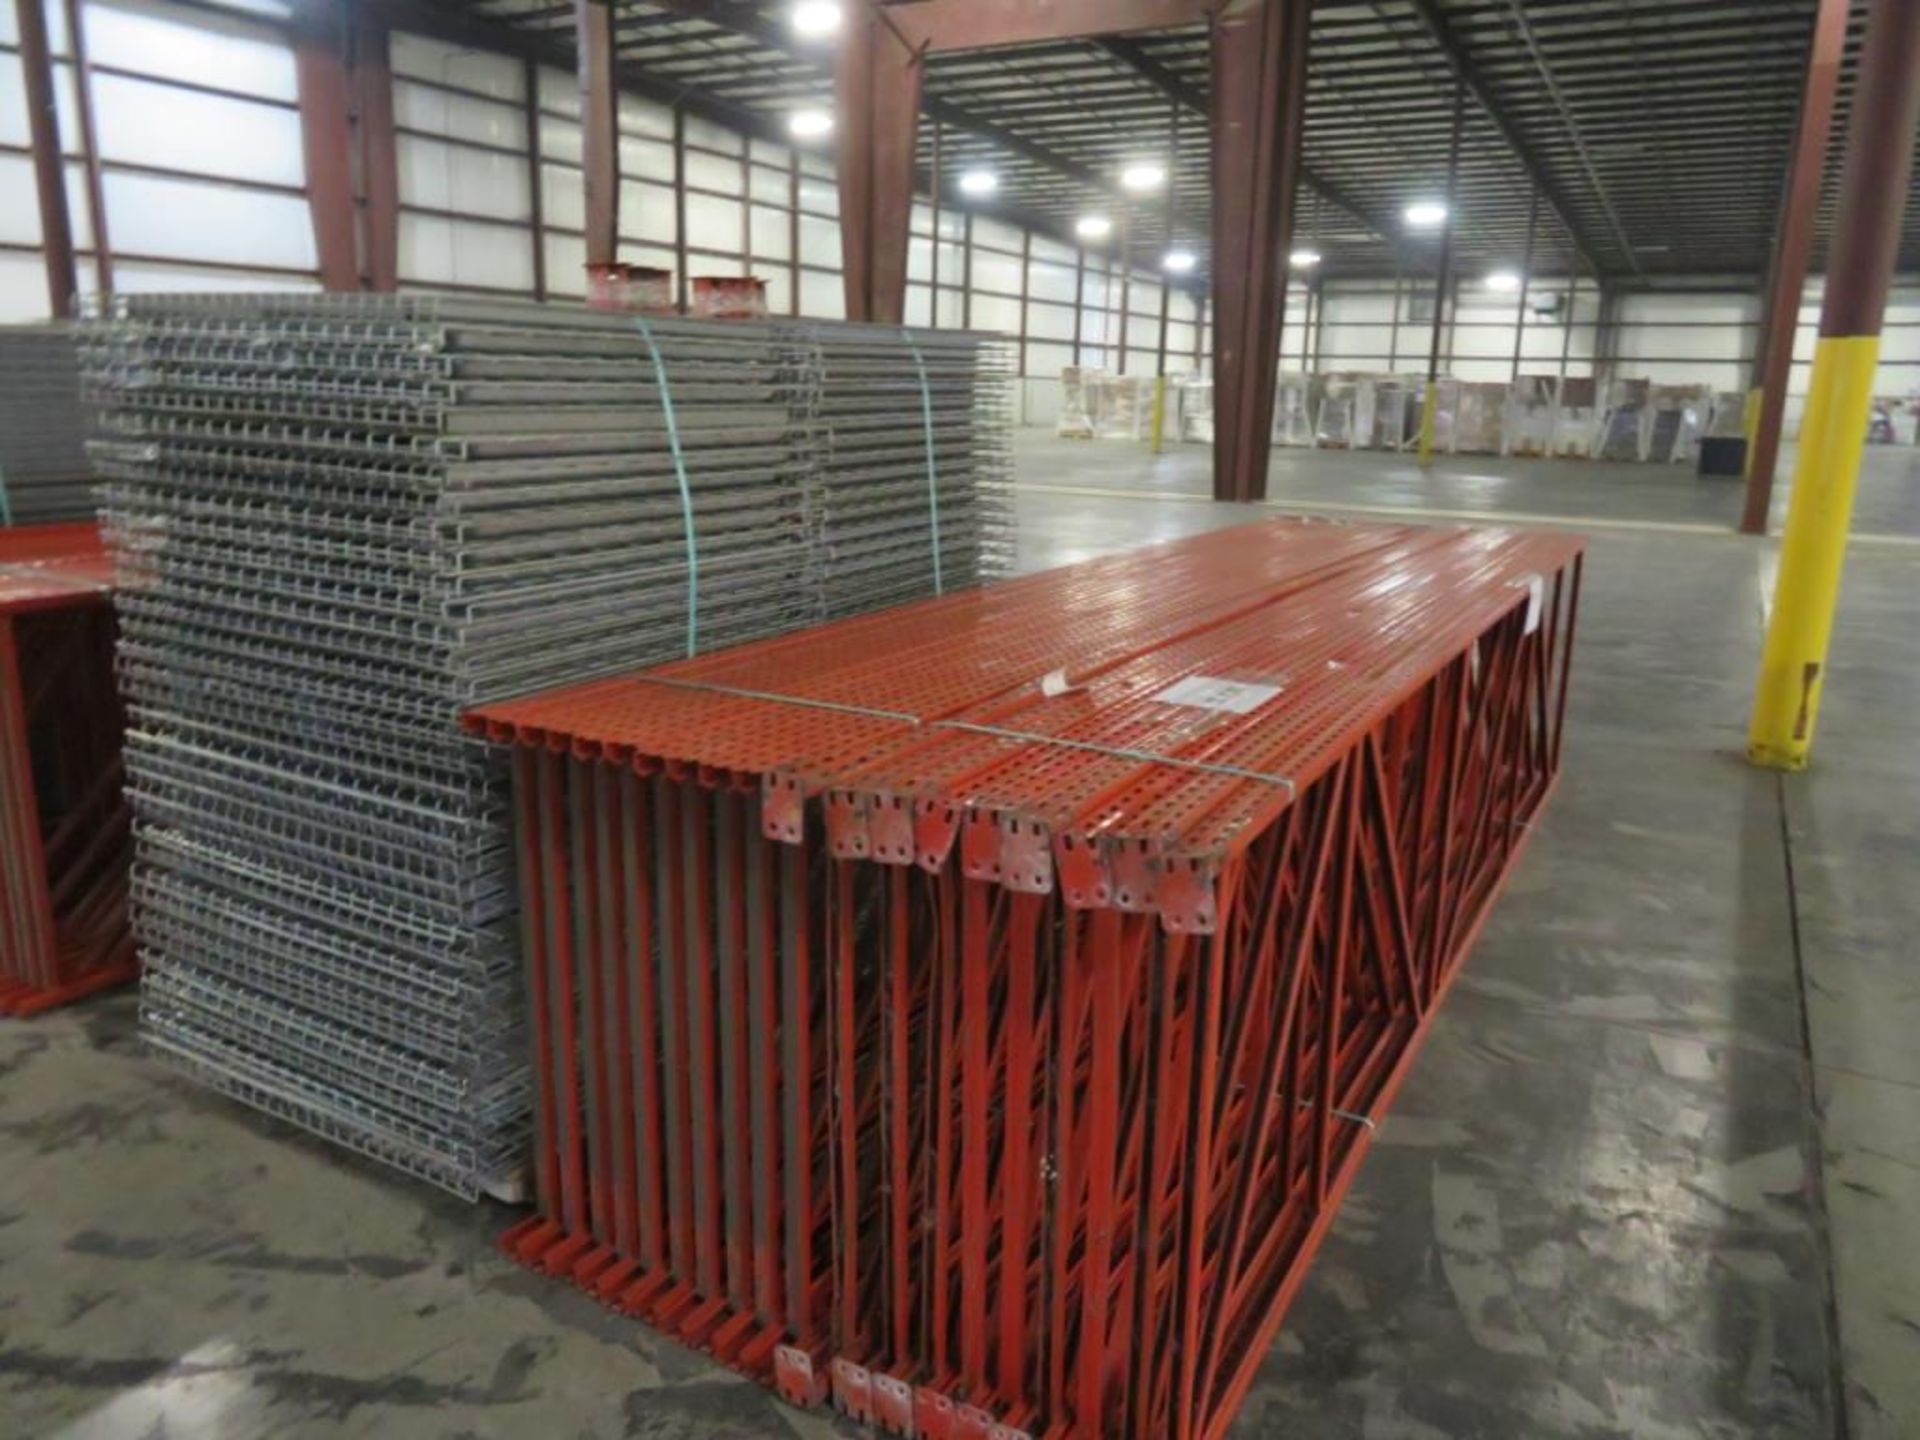 Paltier pallet racking 19 uprights 48" wide and 18' tall, 144 beams 2 1/2" x 2 3/4" & 8' long, 10 - Image 8 of 9